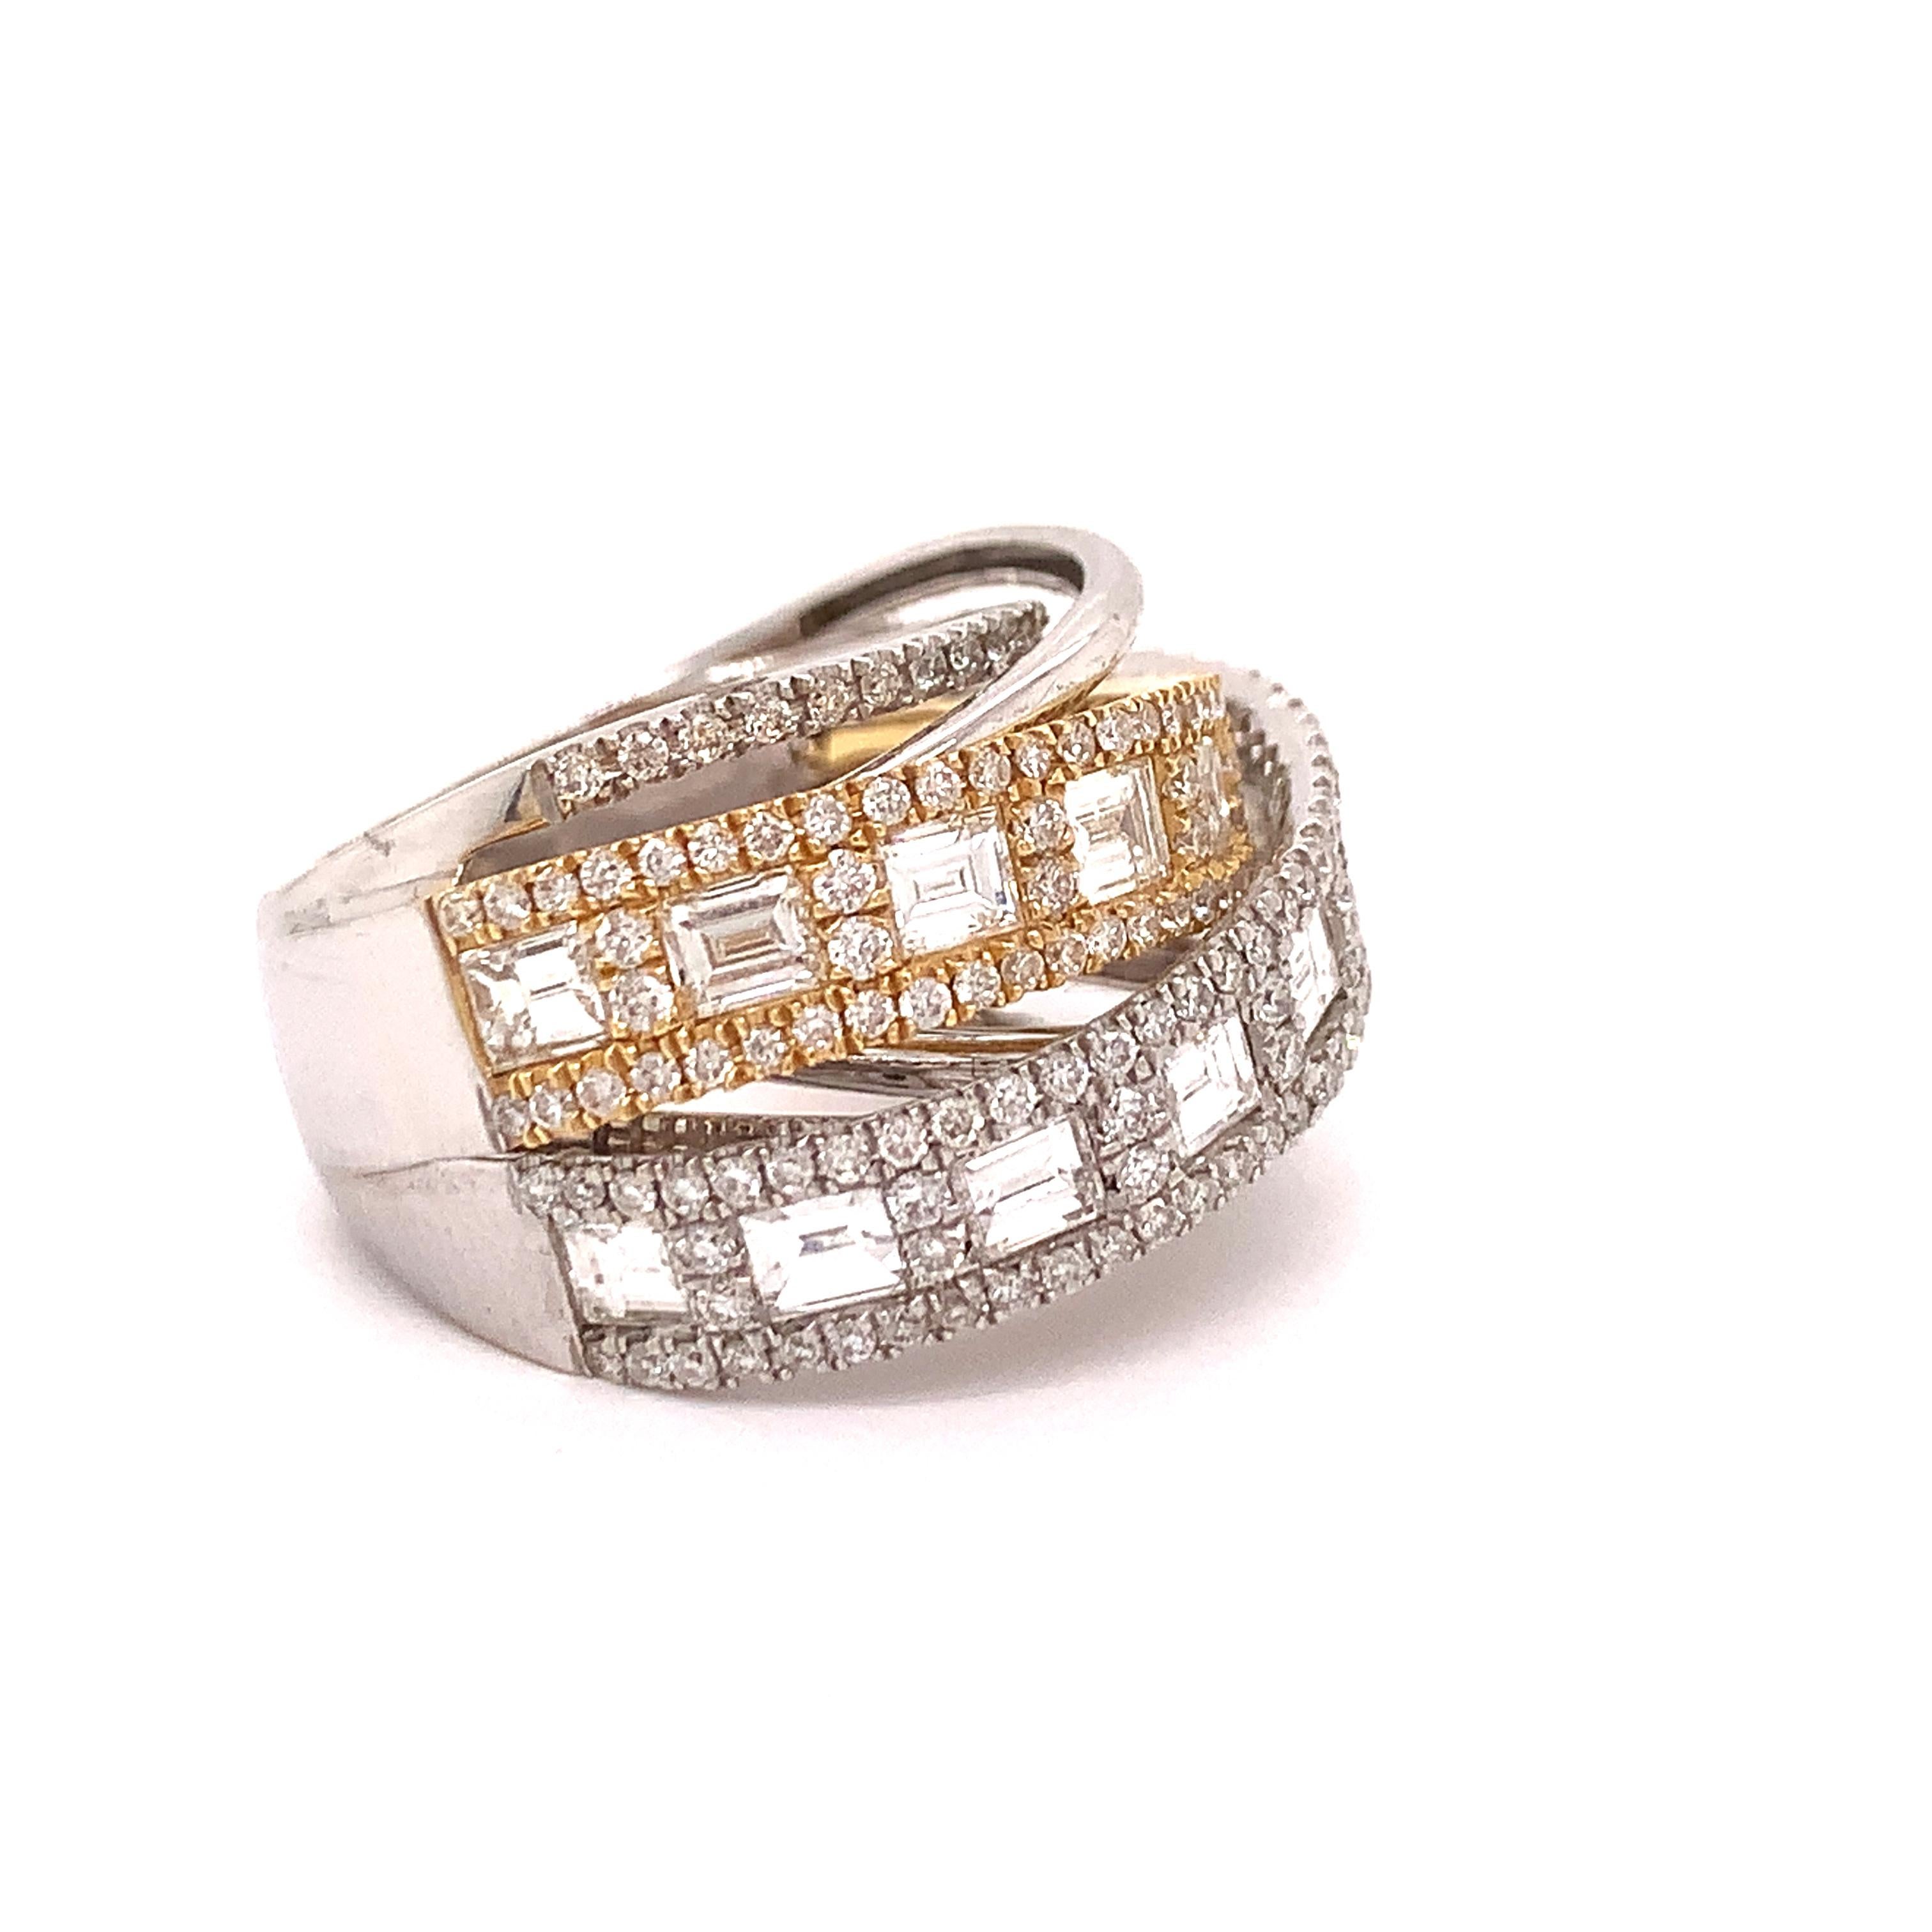 Superb combination of intertwining but stationary bands.  Delicate diamond bands in 18k white gold combined with wider bands in yellow and white gold with round and baguette diamonds. 1.11 cttw in round diamonds and 1.82 cttw in baguette.  A total